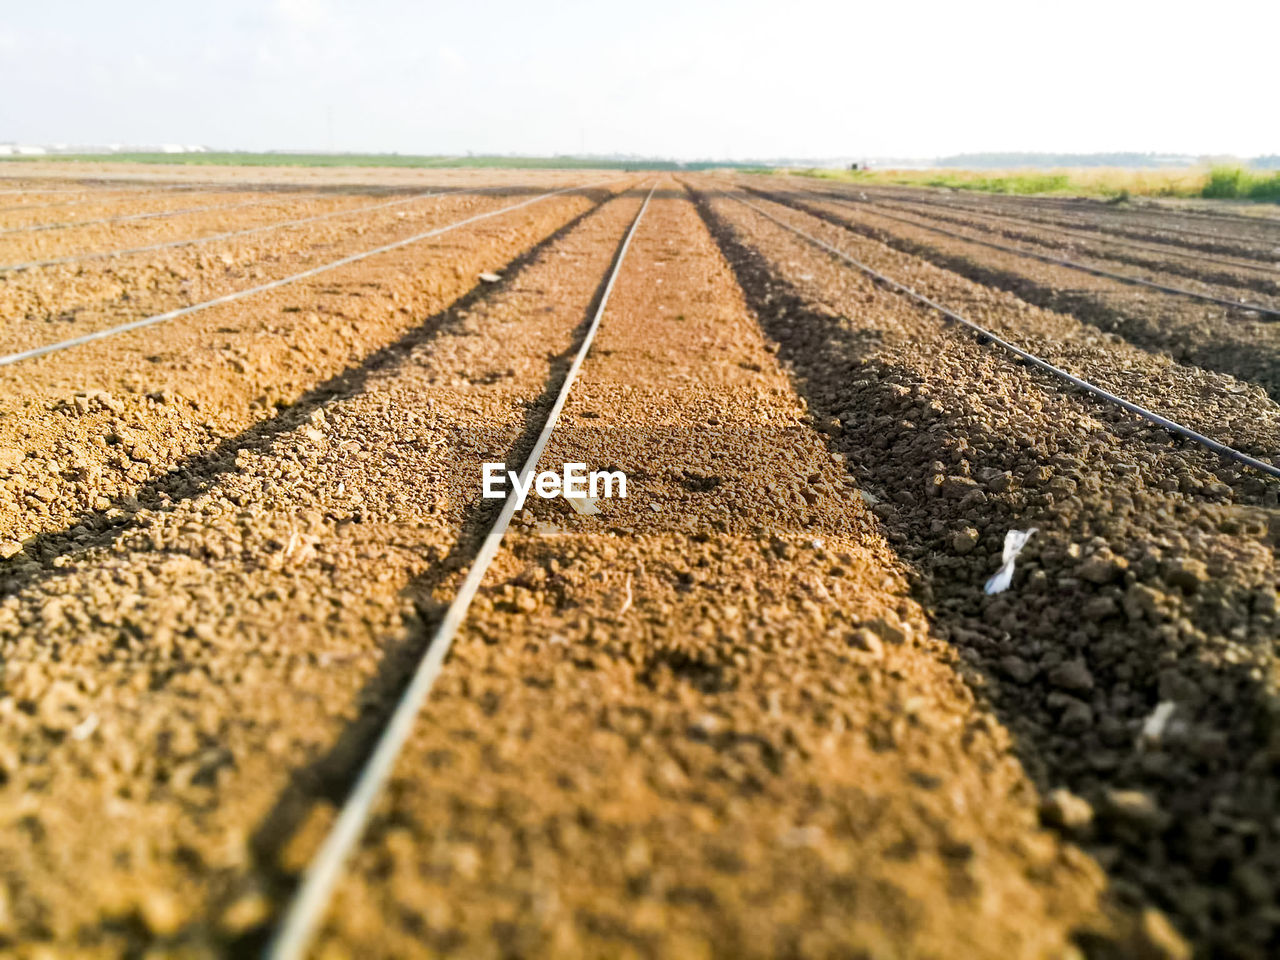 SURFACE LEVEL OF AGRICULTURAL FIELD